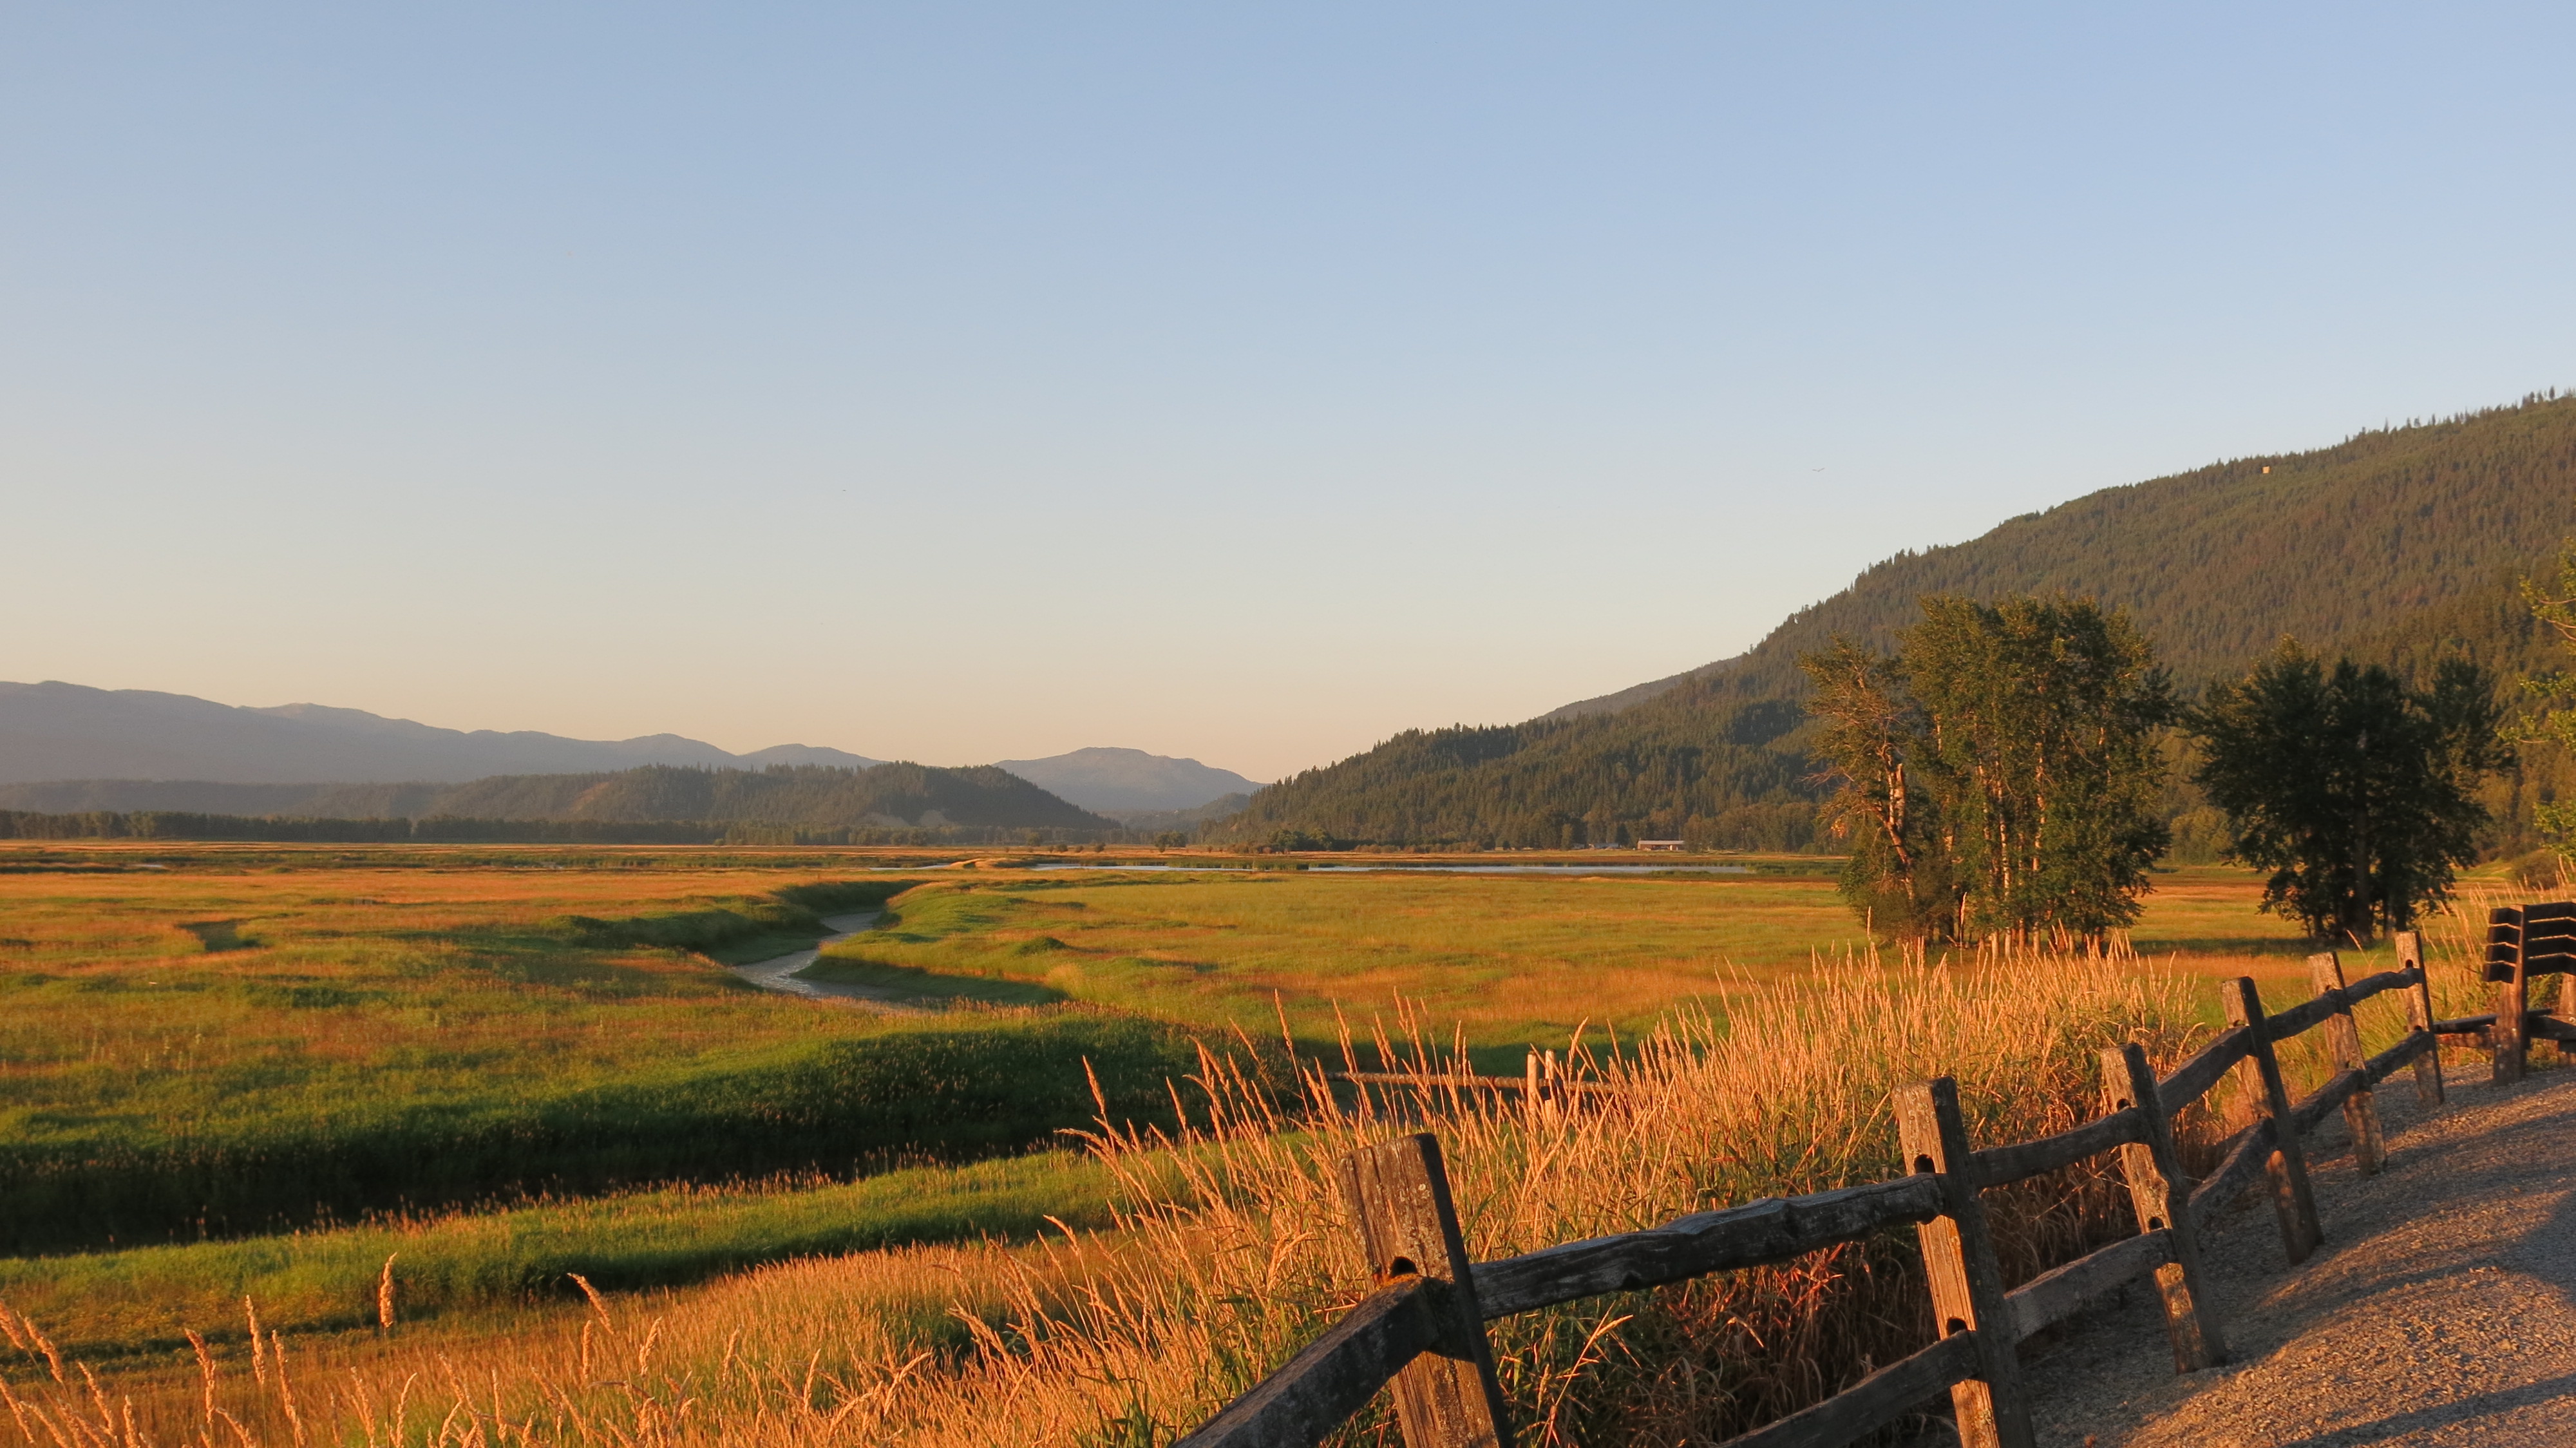 A slow drive or walk on Kootenai's auto tour route allows for many viewing opportunities.